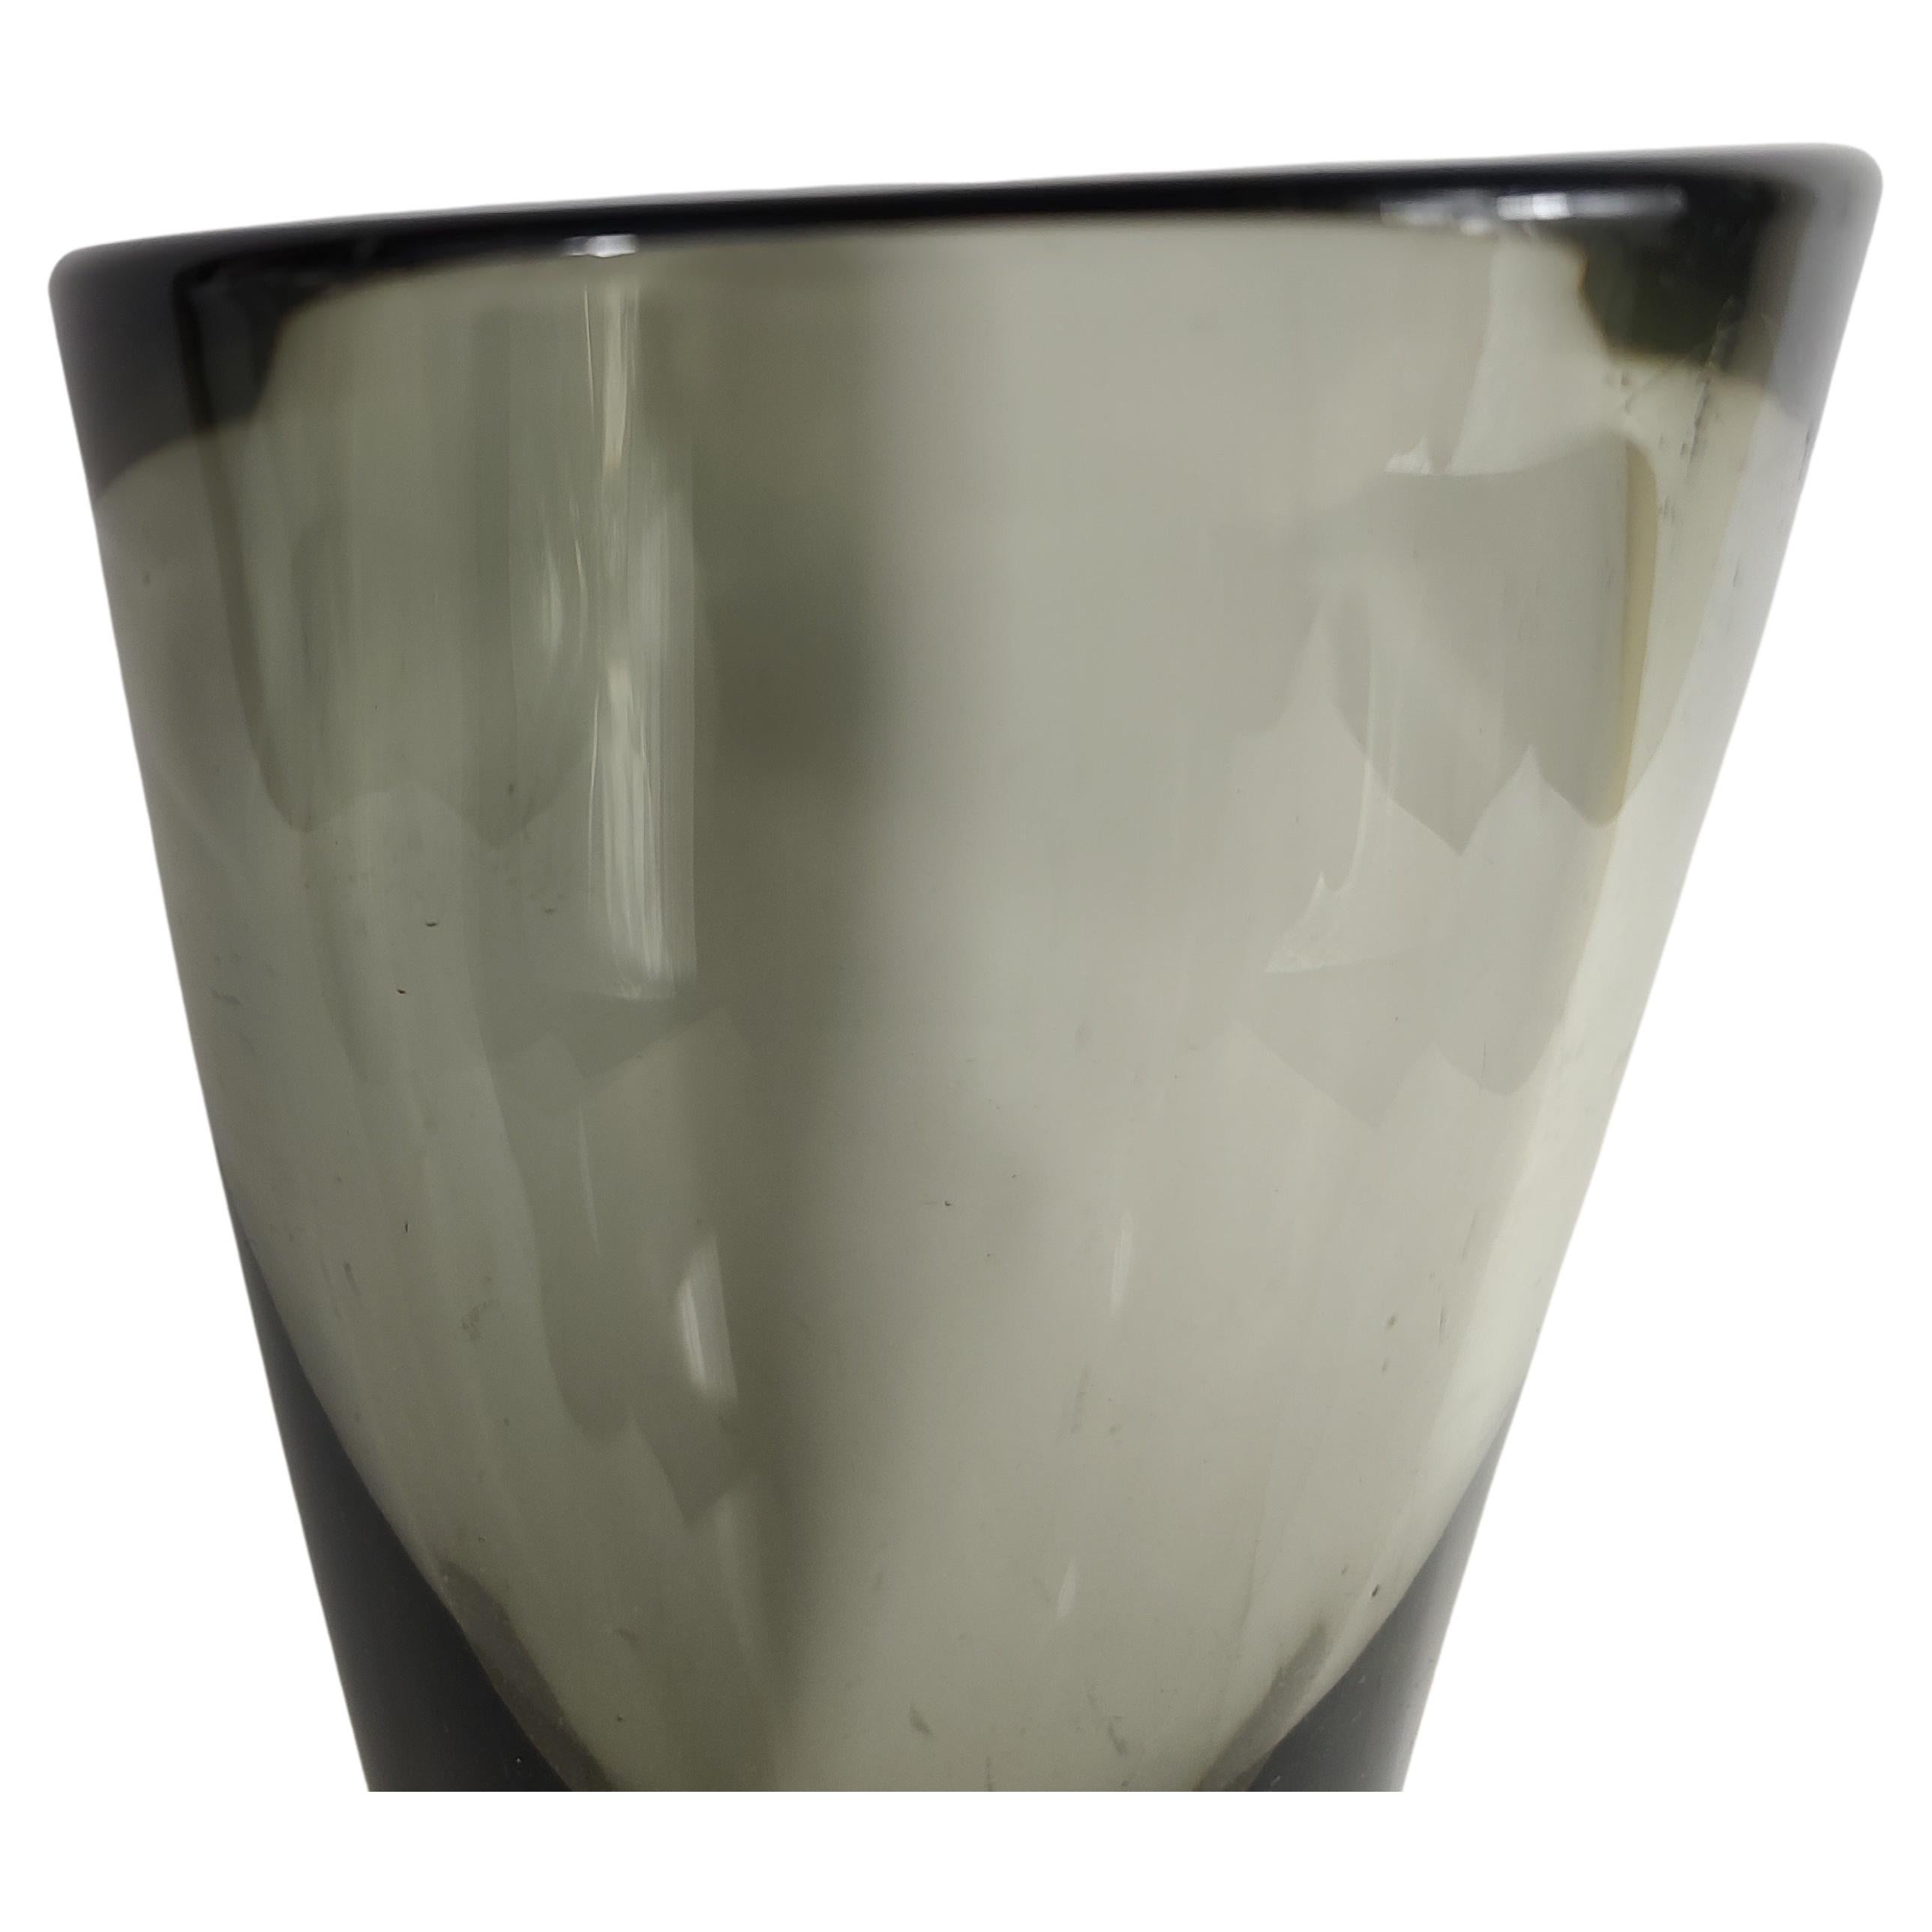 Fabulous c1960 smoked grey glass vase by Per Lutken for Holmegaard. In excellent vintage condition with minimal wear, as expected to the base. No damage. Signed and dated, polished Pontil.